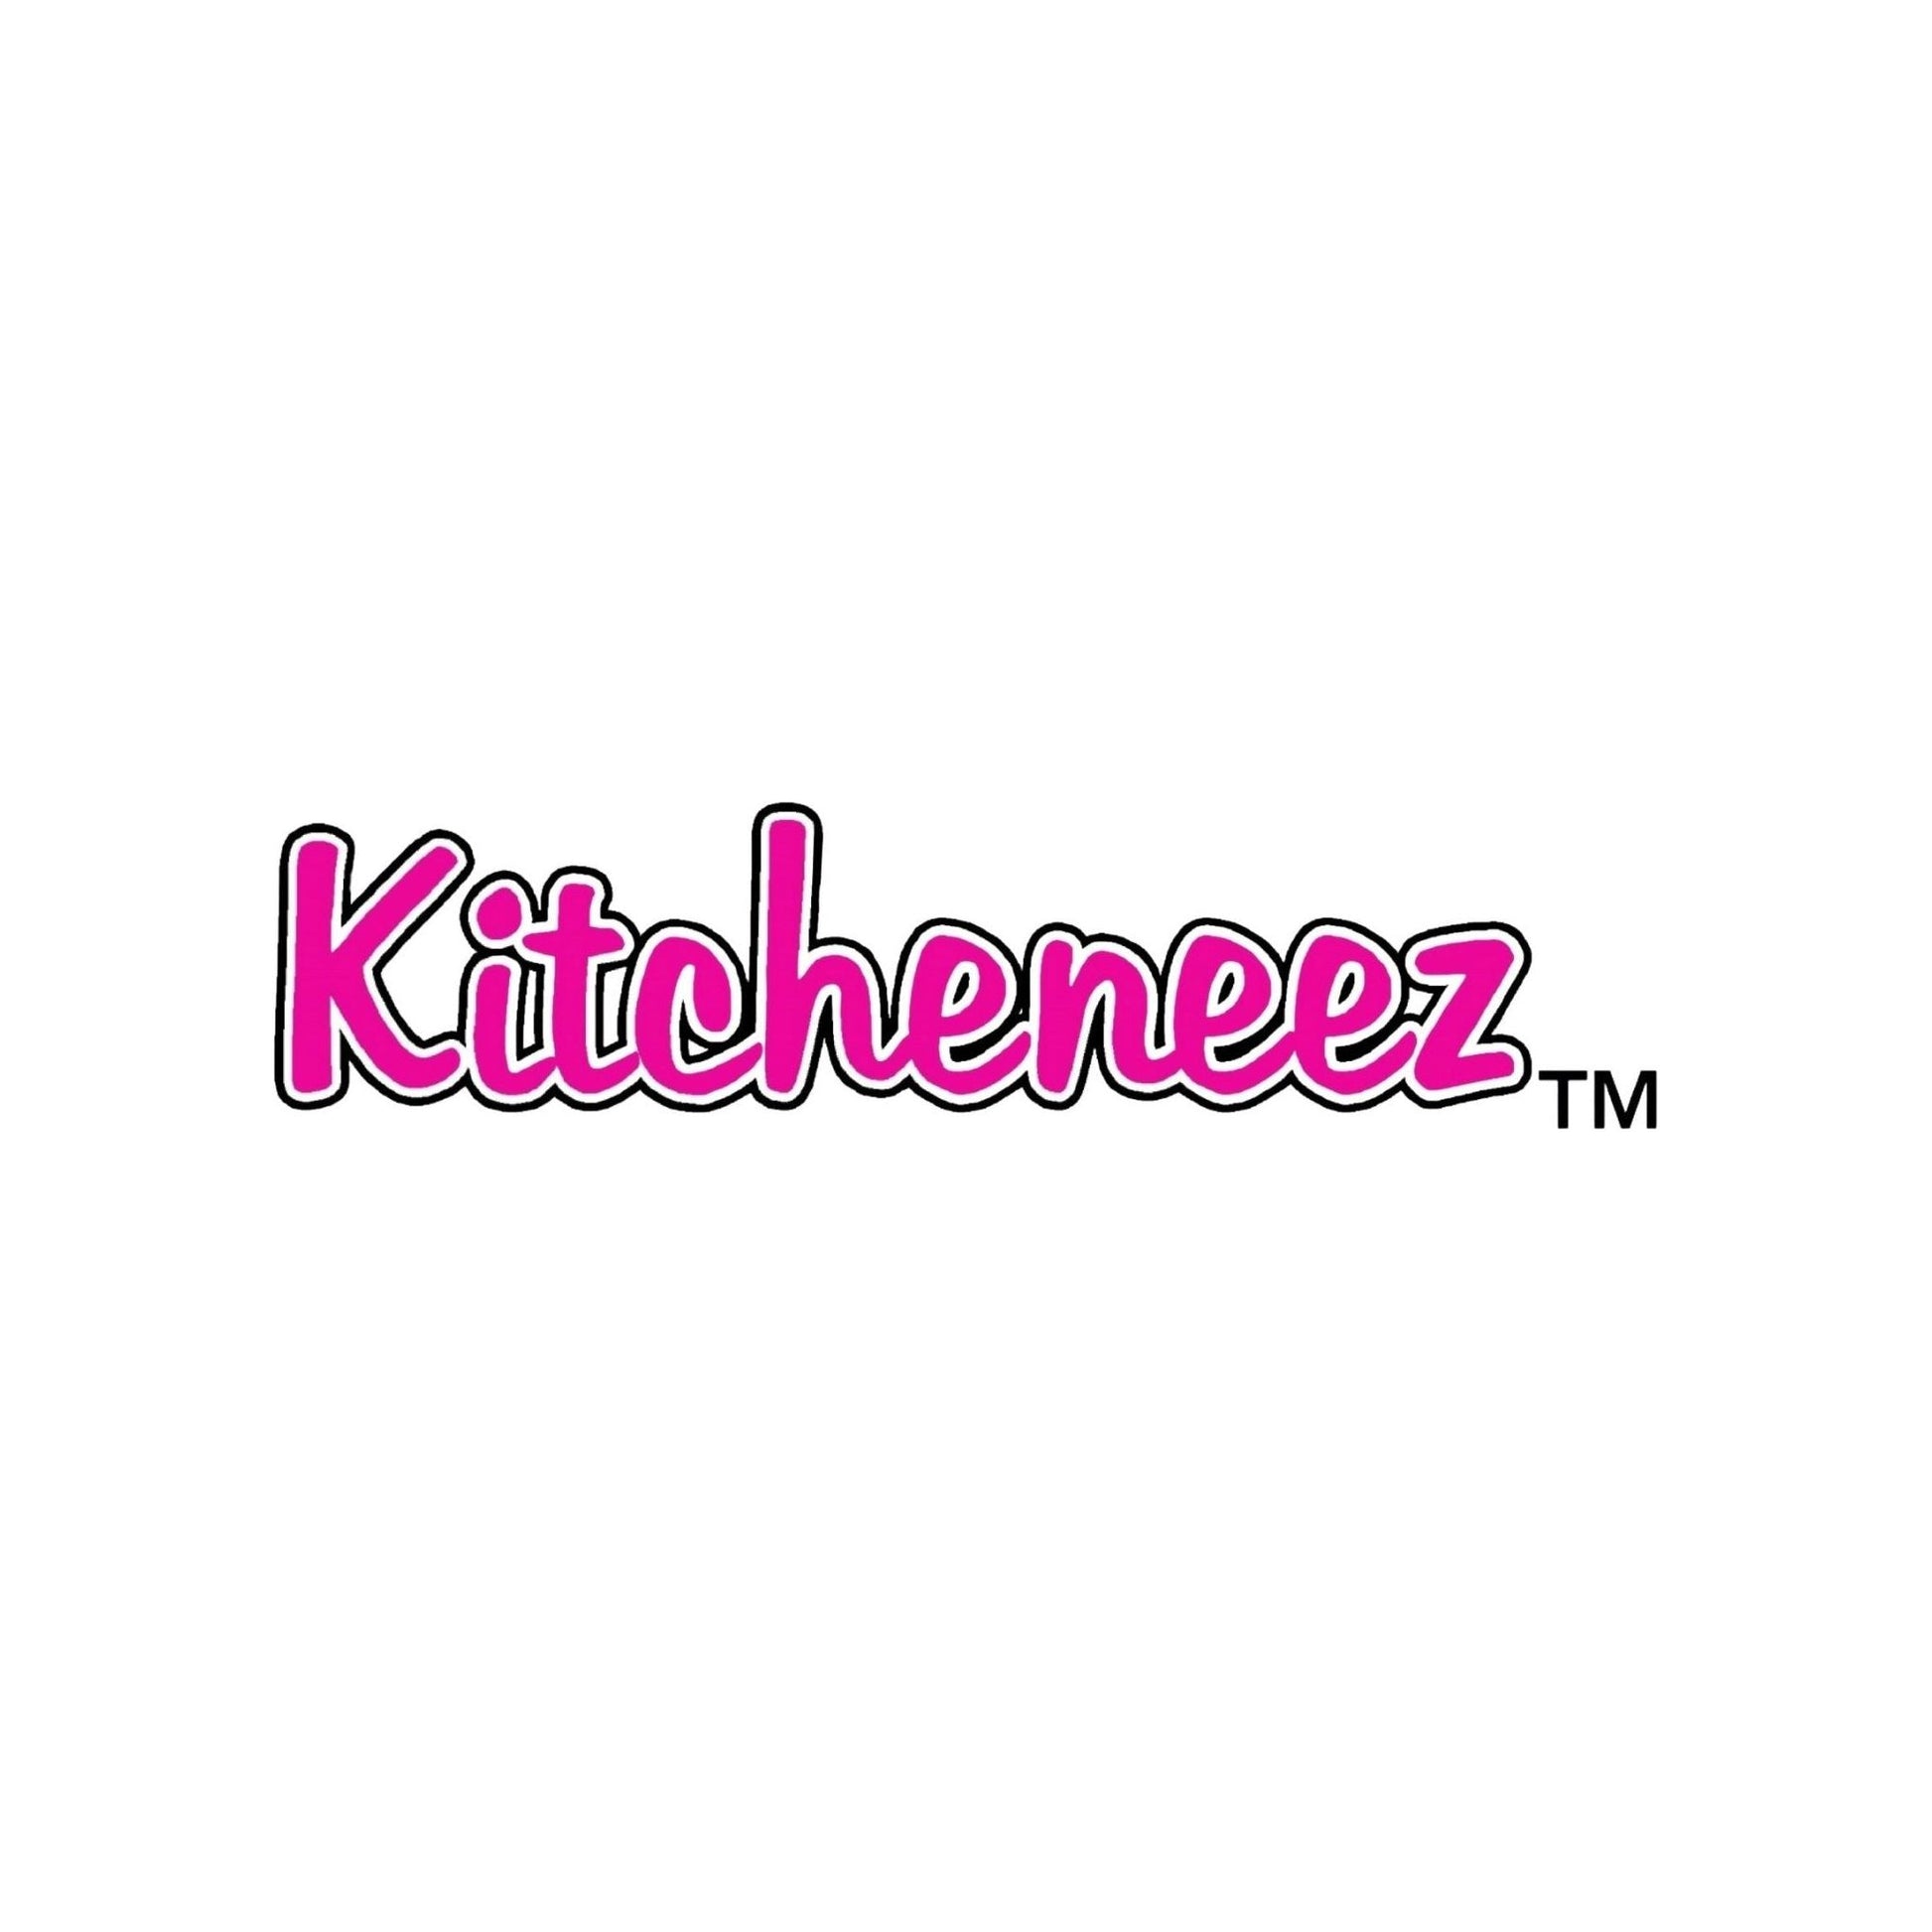 Become a Sales Representative- $99 yearly - Kitcheneez Mixes & More!